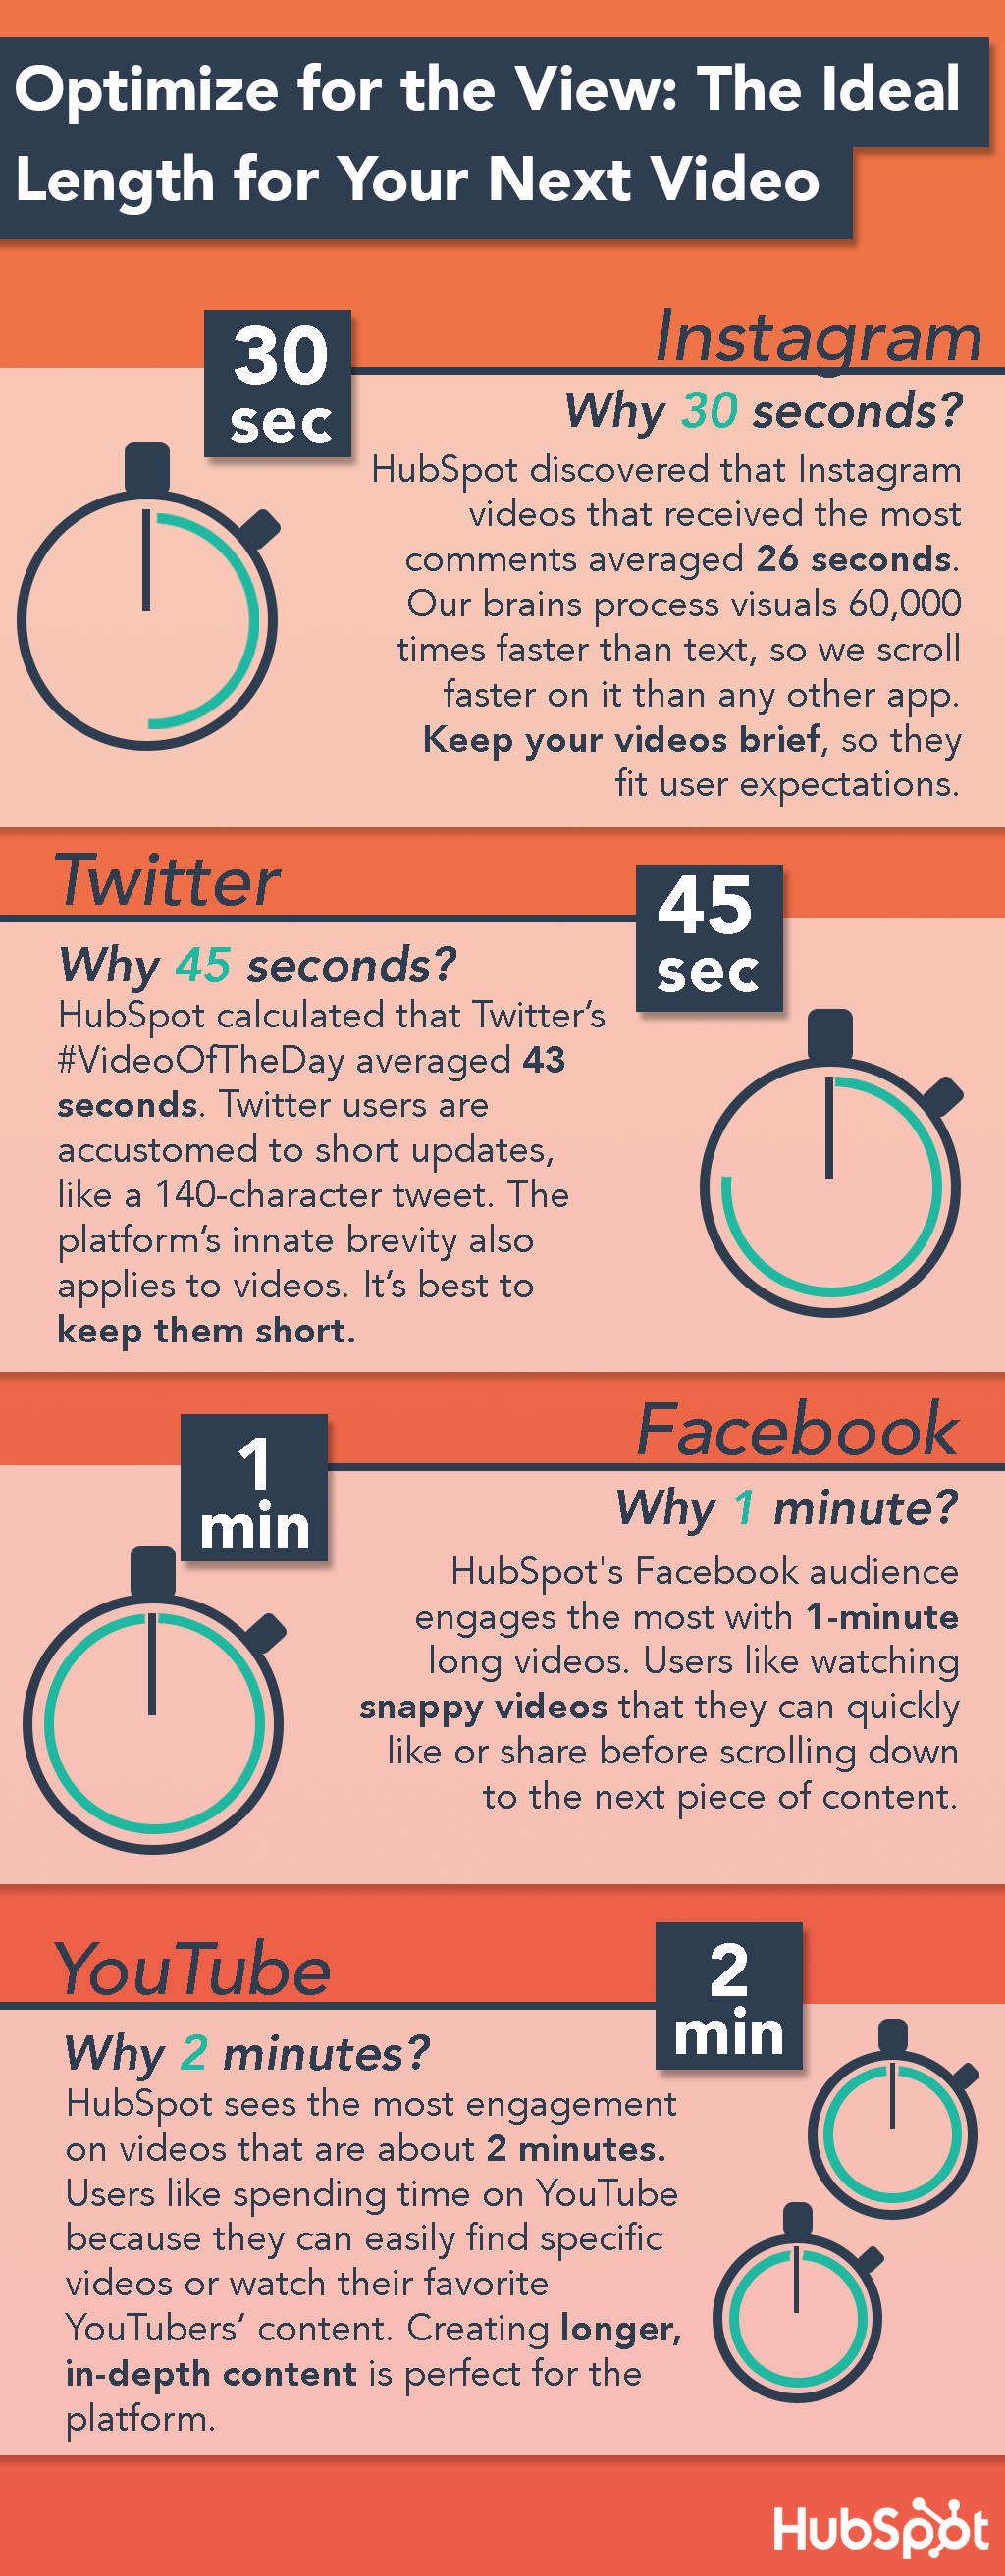 infographic for how long videos should be on instagram twitter facebook and youtube - social media today infographic 5 ways to maximize instagram for